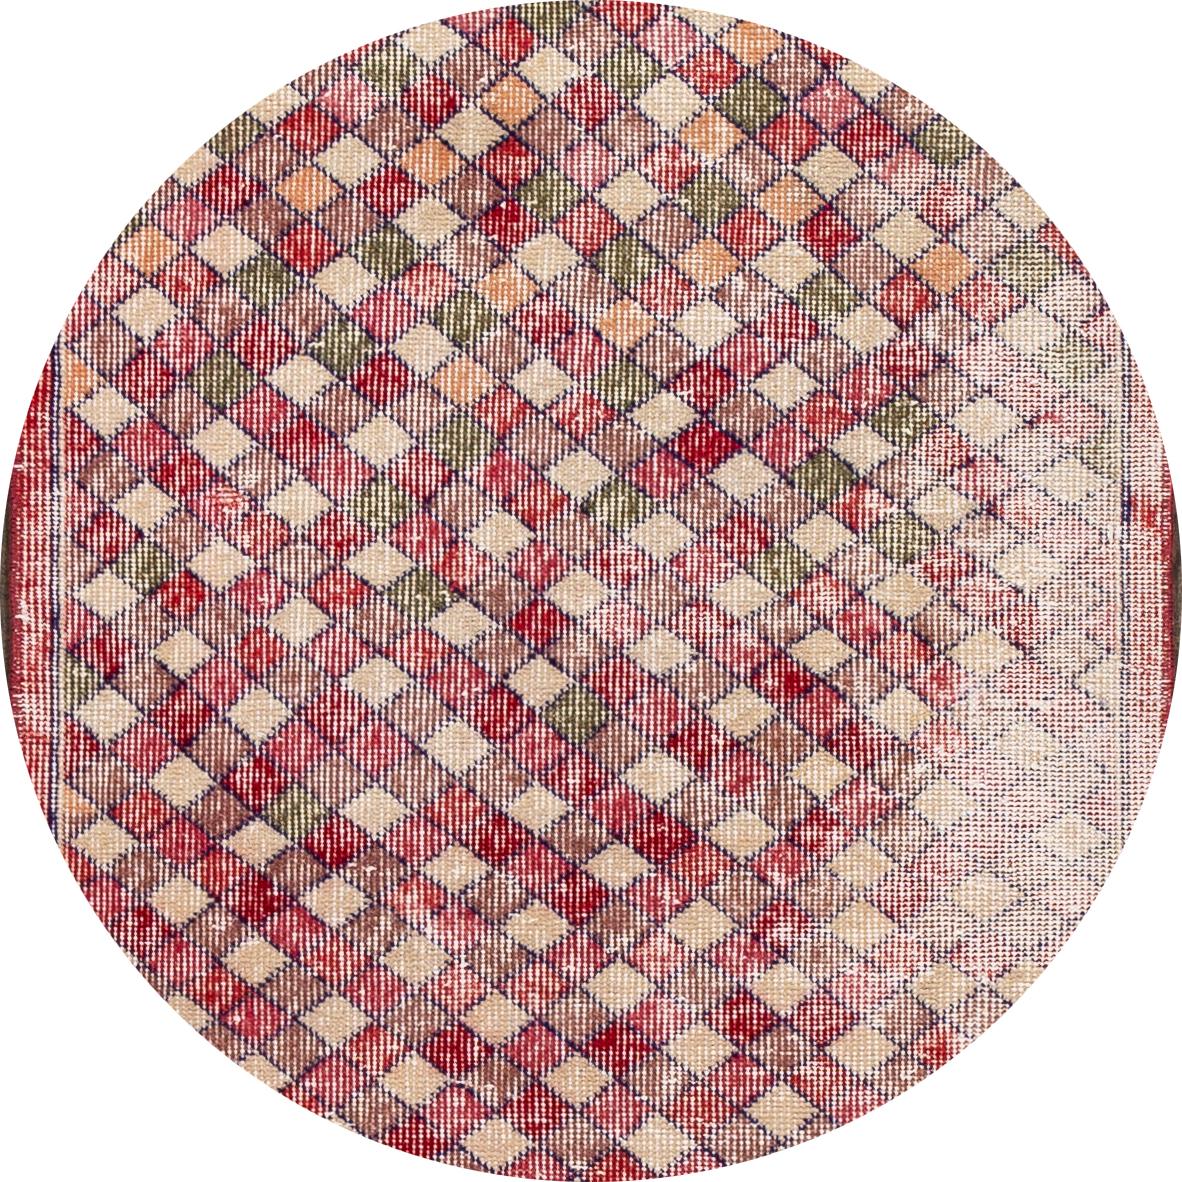 Beautiful hand knotted wool runner rug with a red field and ivory accents in a geometric pattern. This rug measures 2' 7